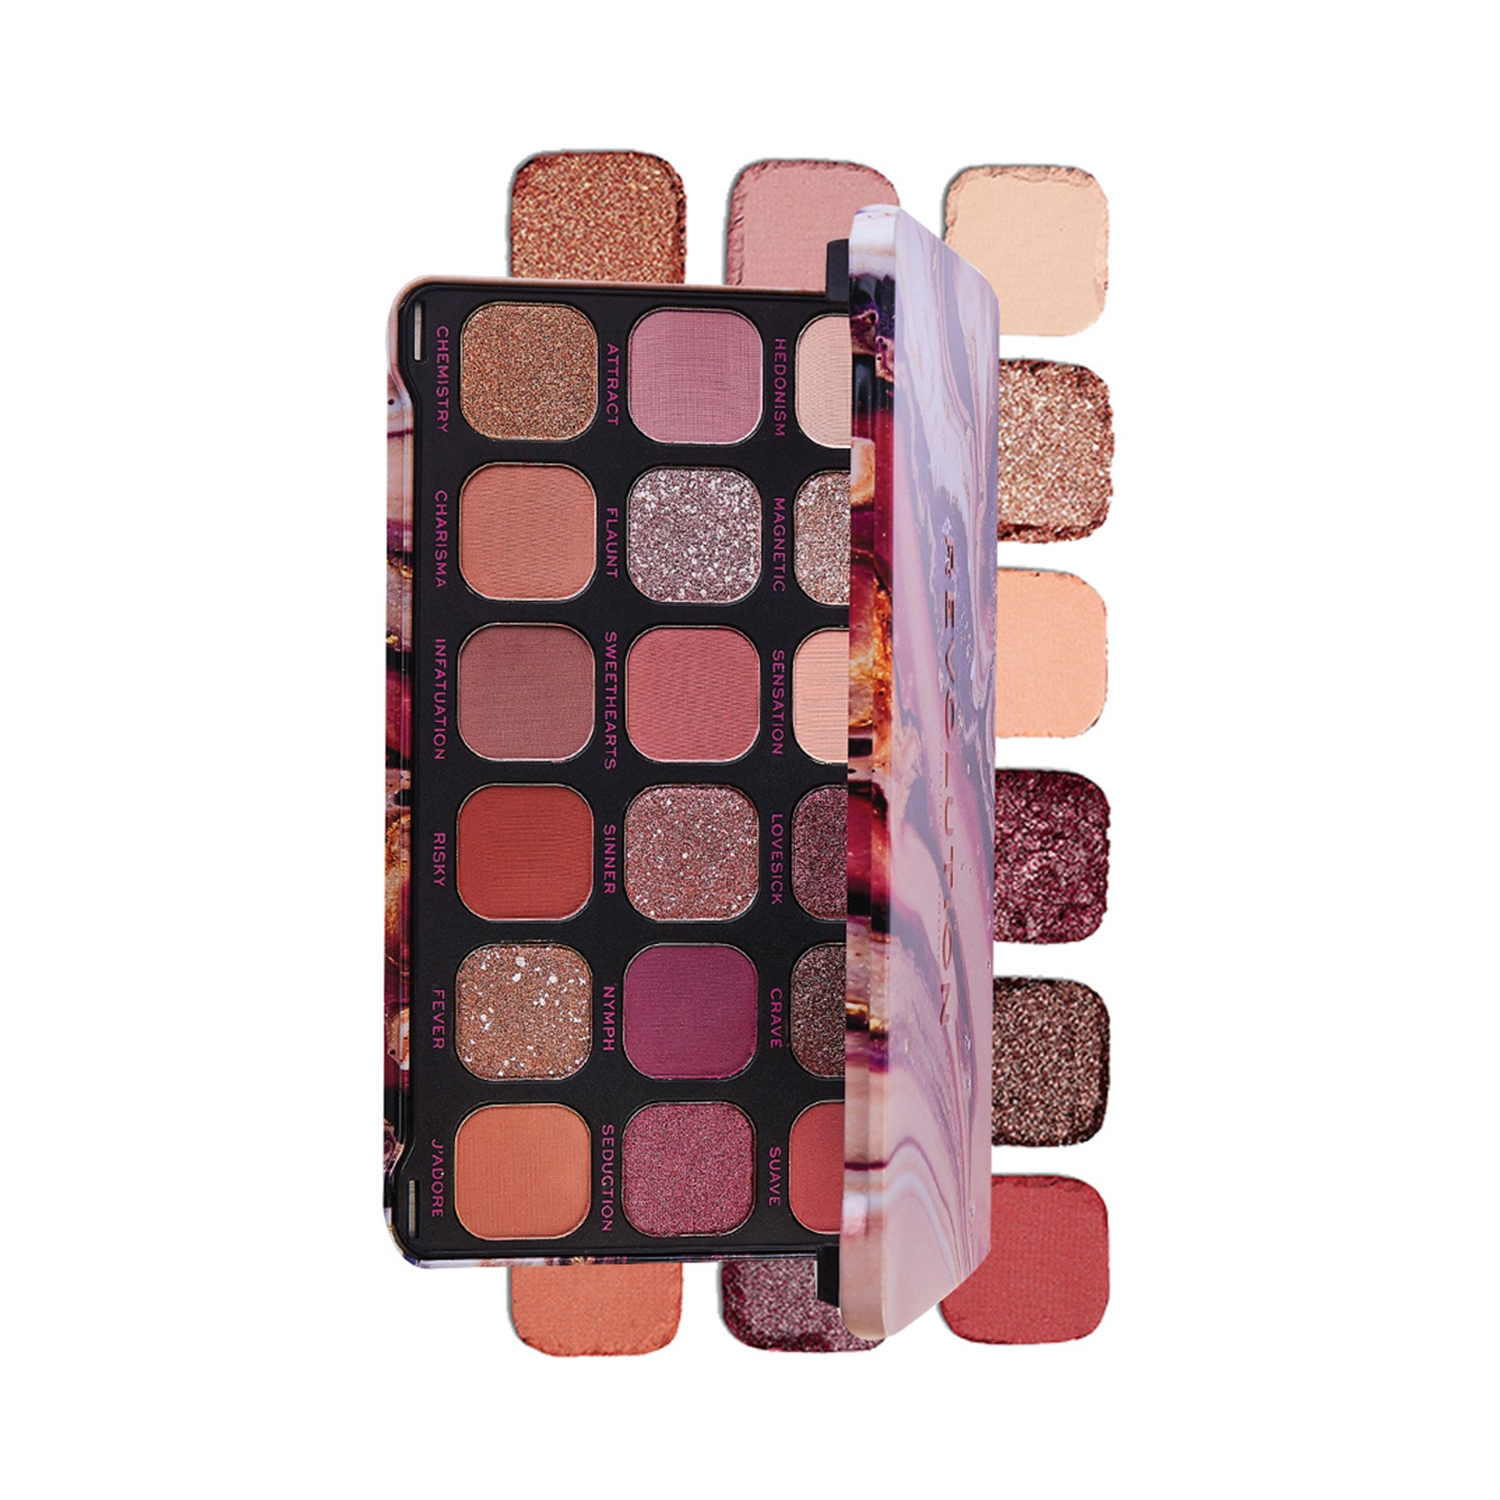 Makeup Revolution Forever Flawless Regal Romance Shadow Palette